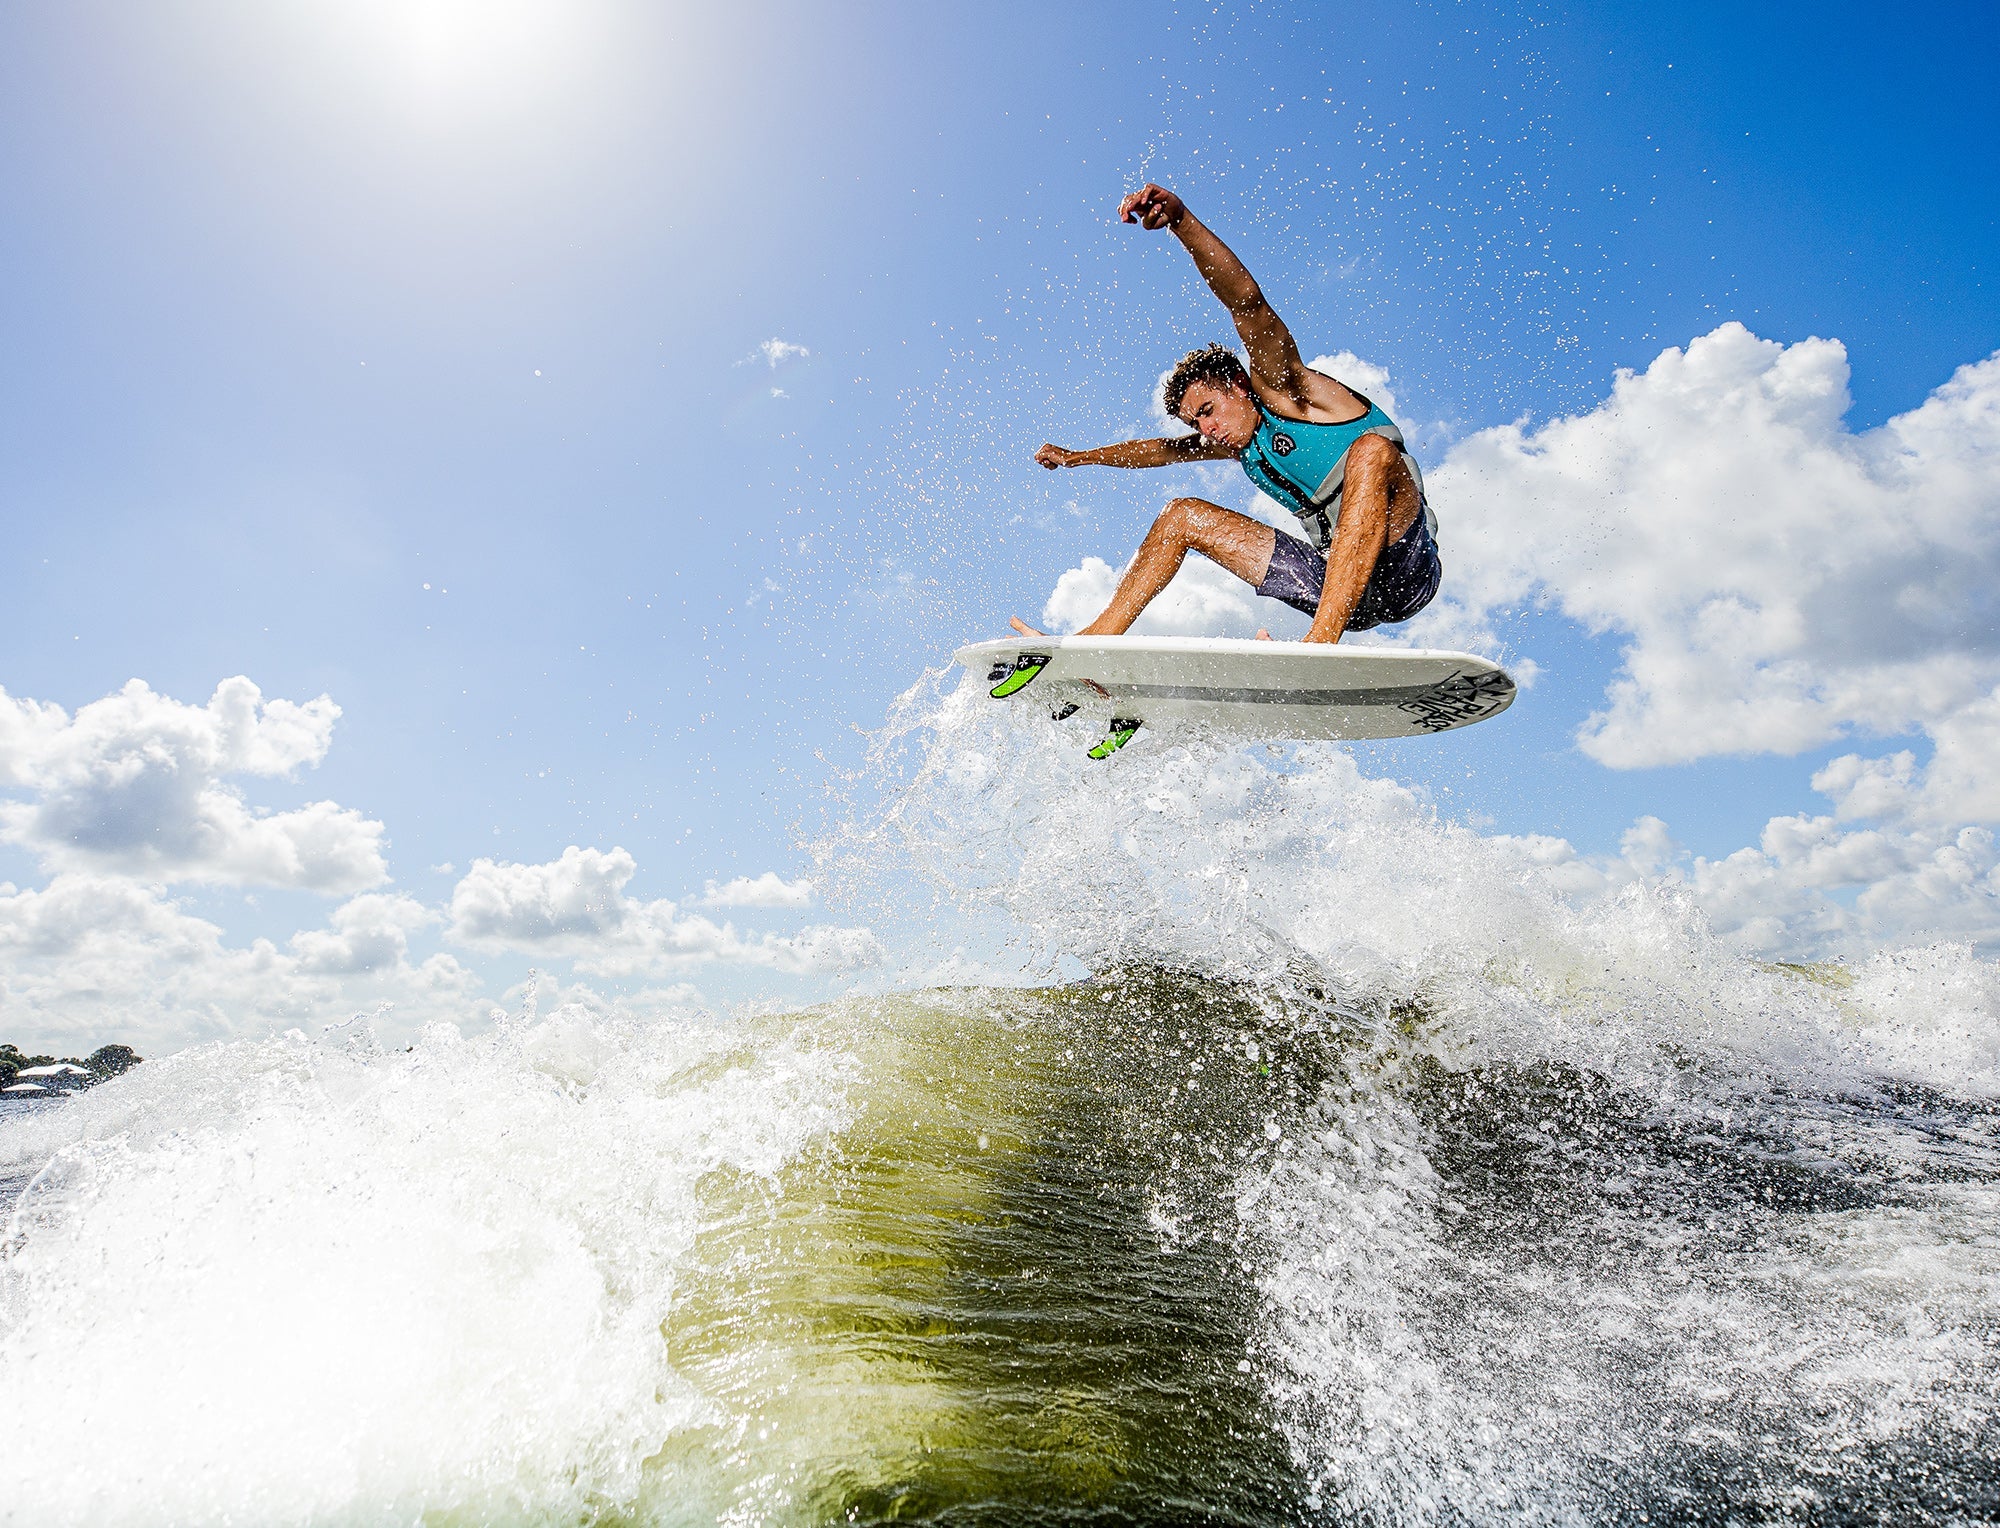 A man is riding a wave on a Phase 5 2023 Phantom Wakesurf Board, effortlessly gliding through the water.